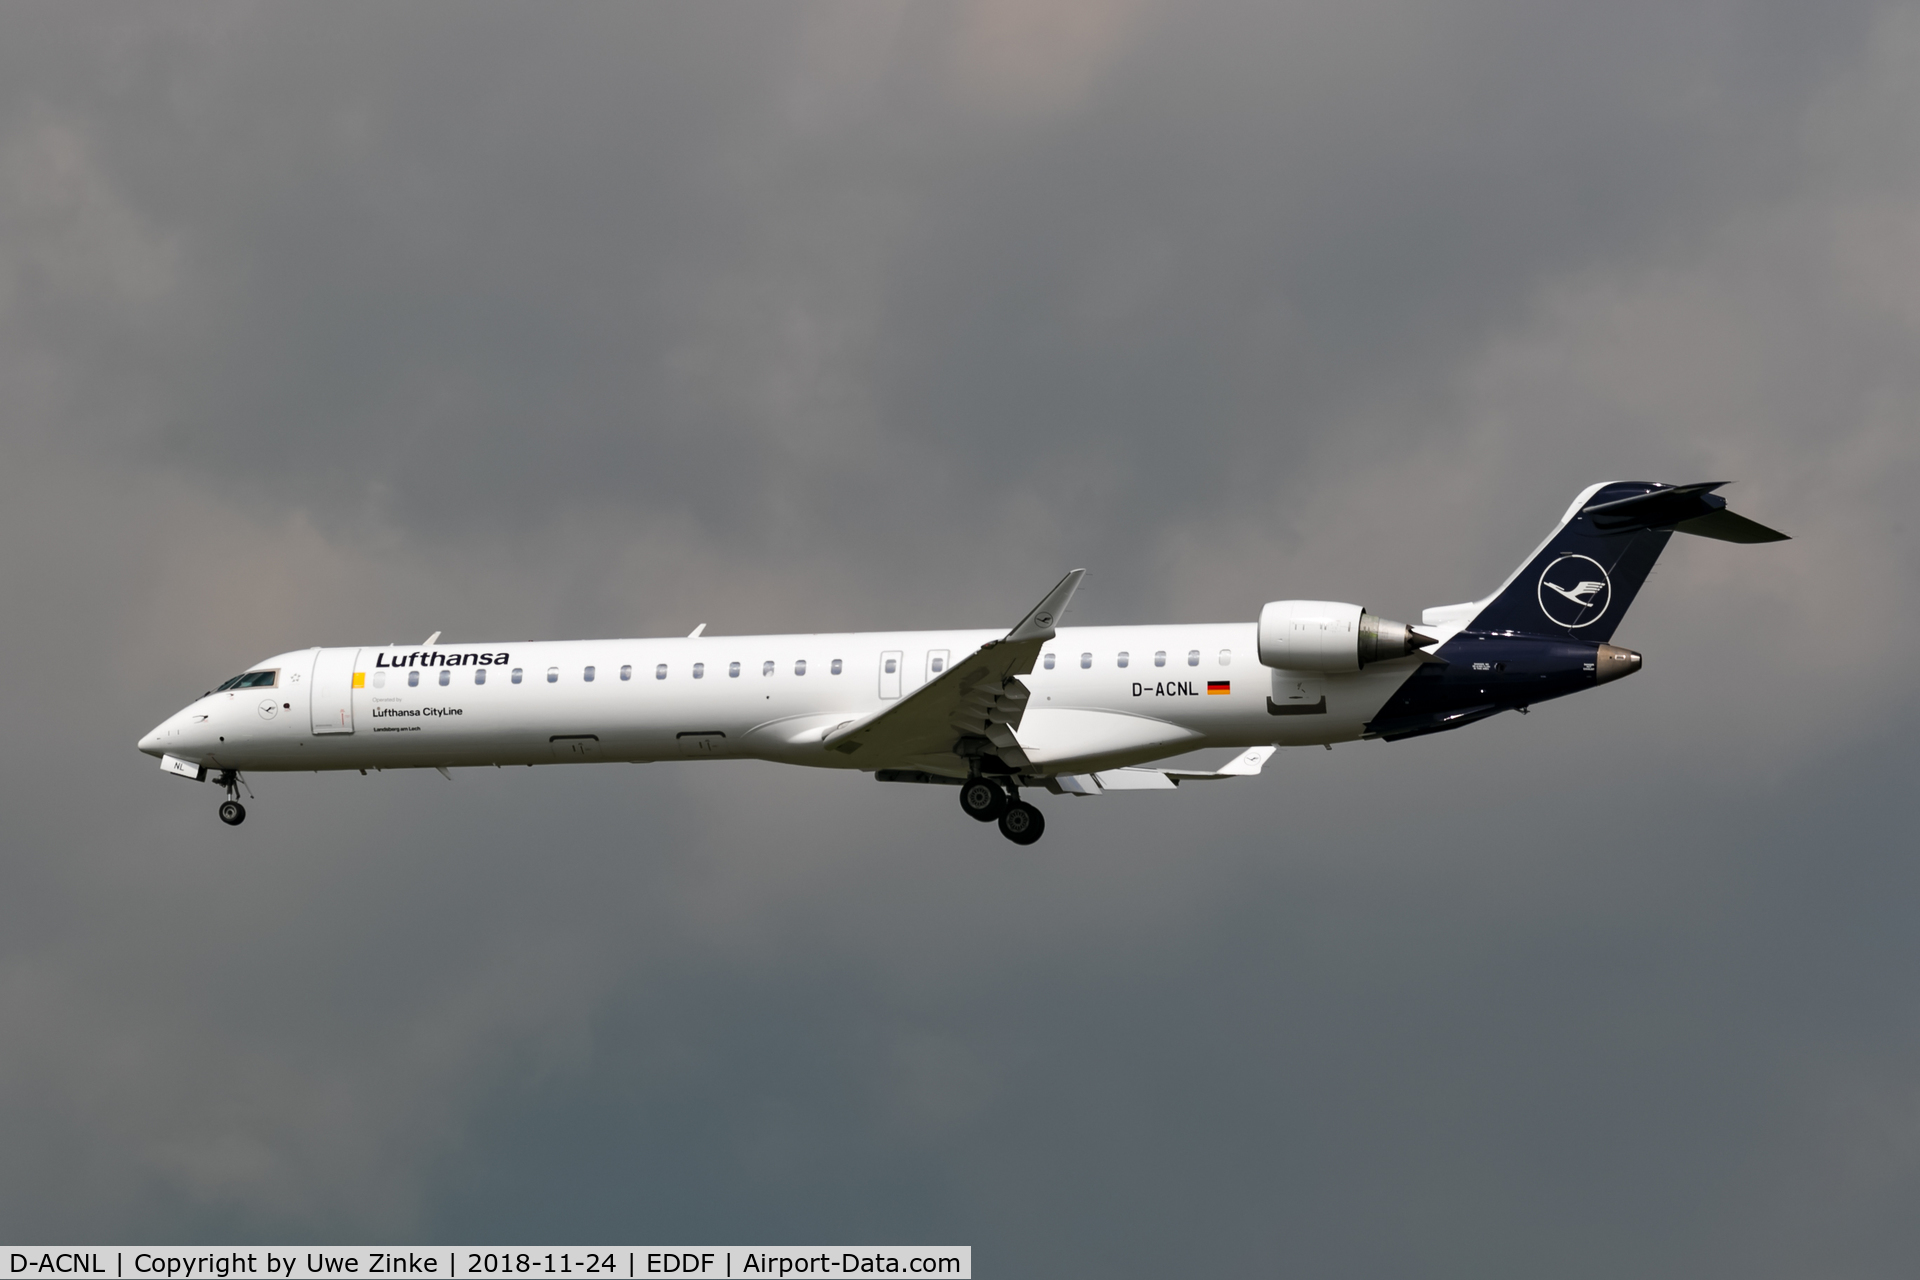 D-ACNL, 2010 Bombardier CRJ-900 NG (CL-600-2D24) C/N 15252, bad weather in Frankfurt